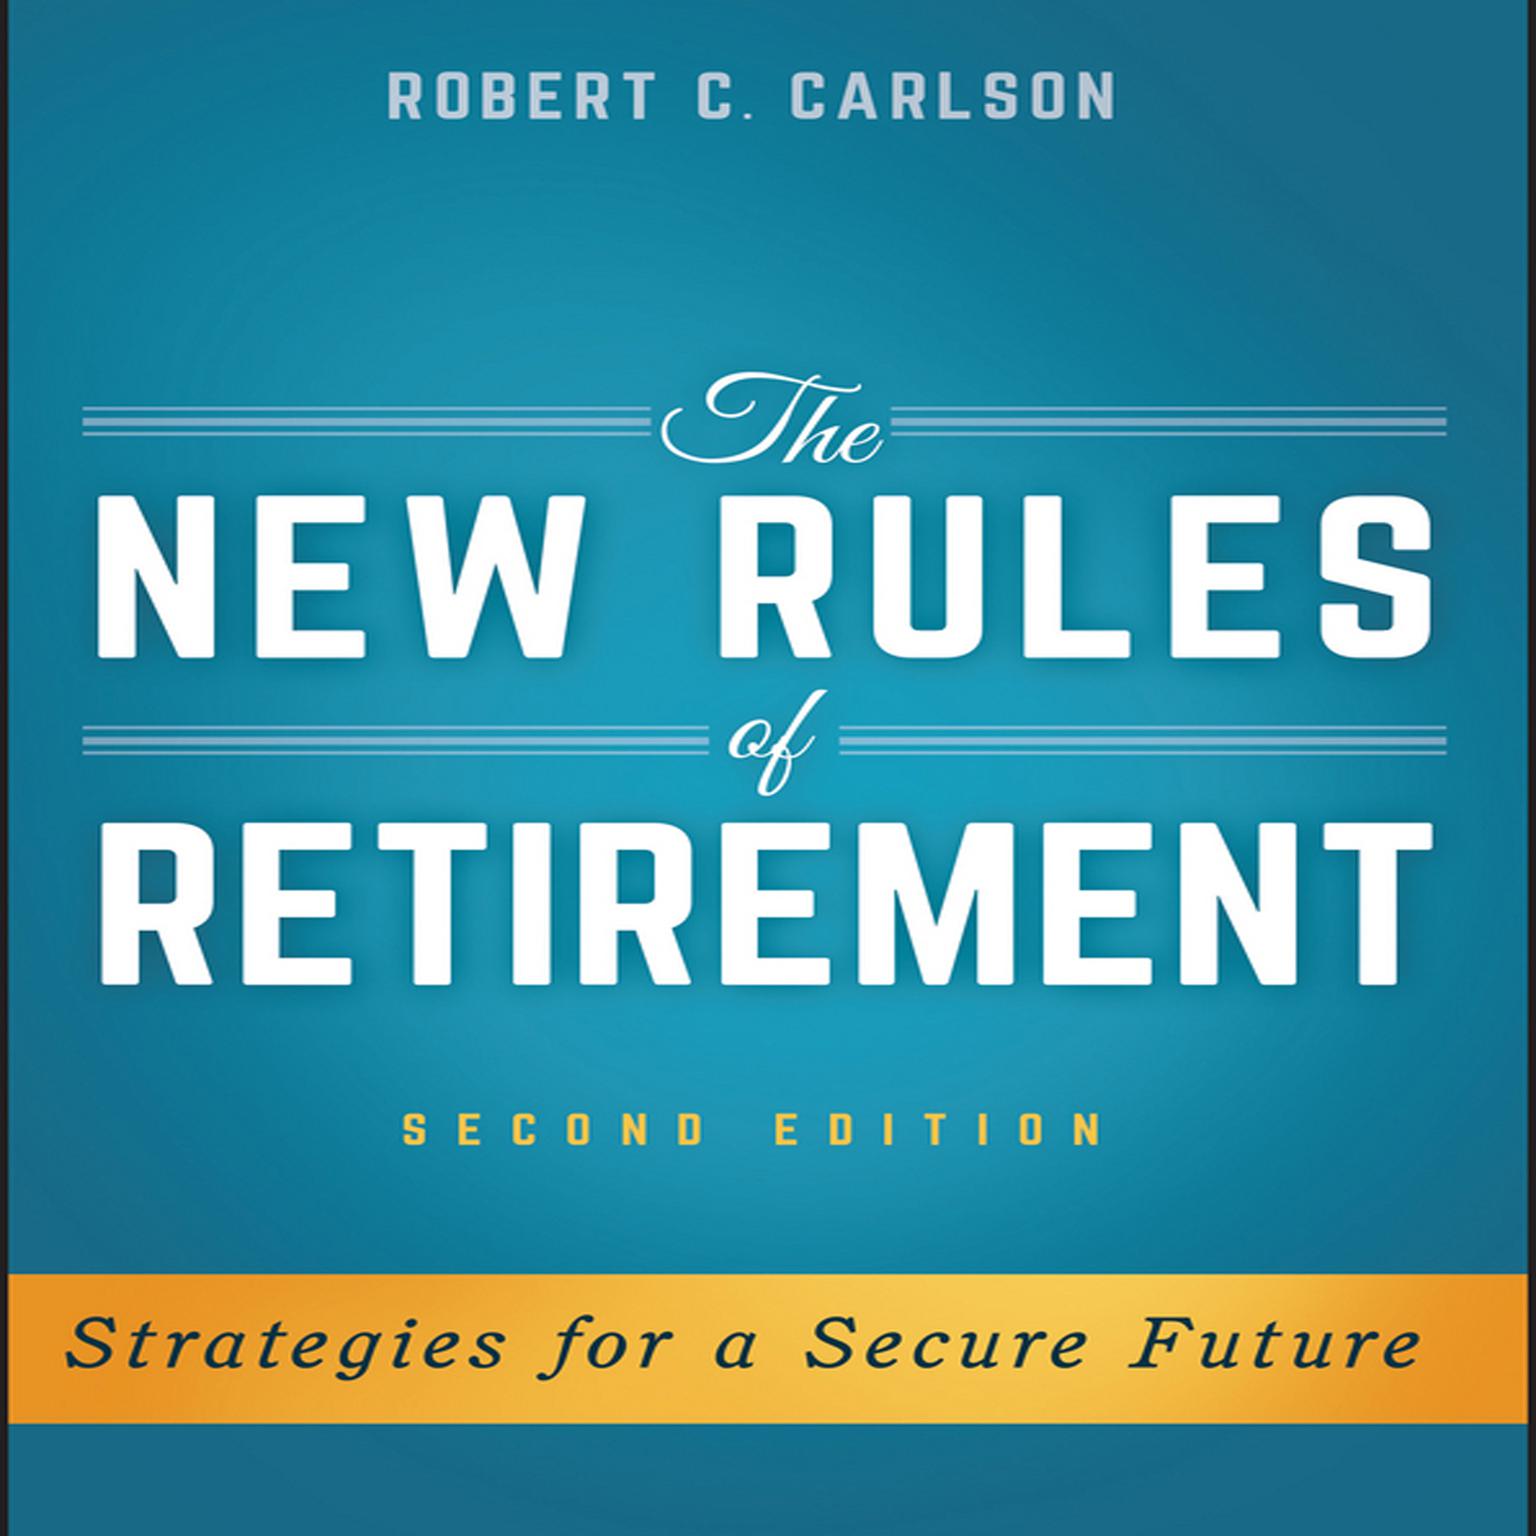 The New Rules of Retirement: Strategies for a Secure Future, 2nd Edition Audiobook, by Robert C. Carlson